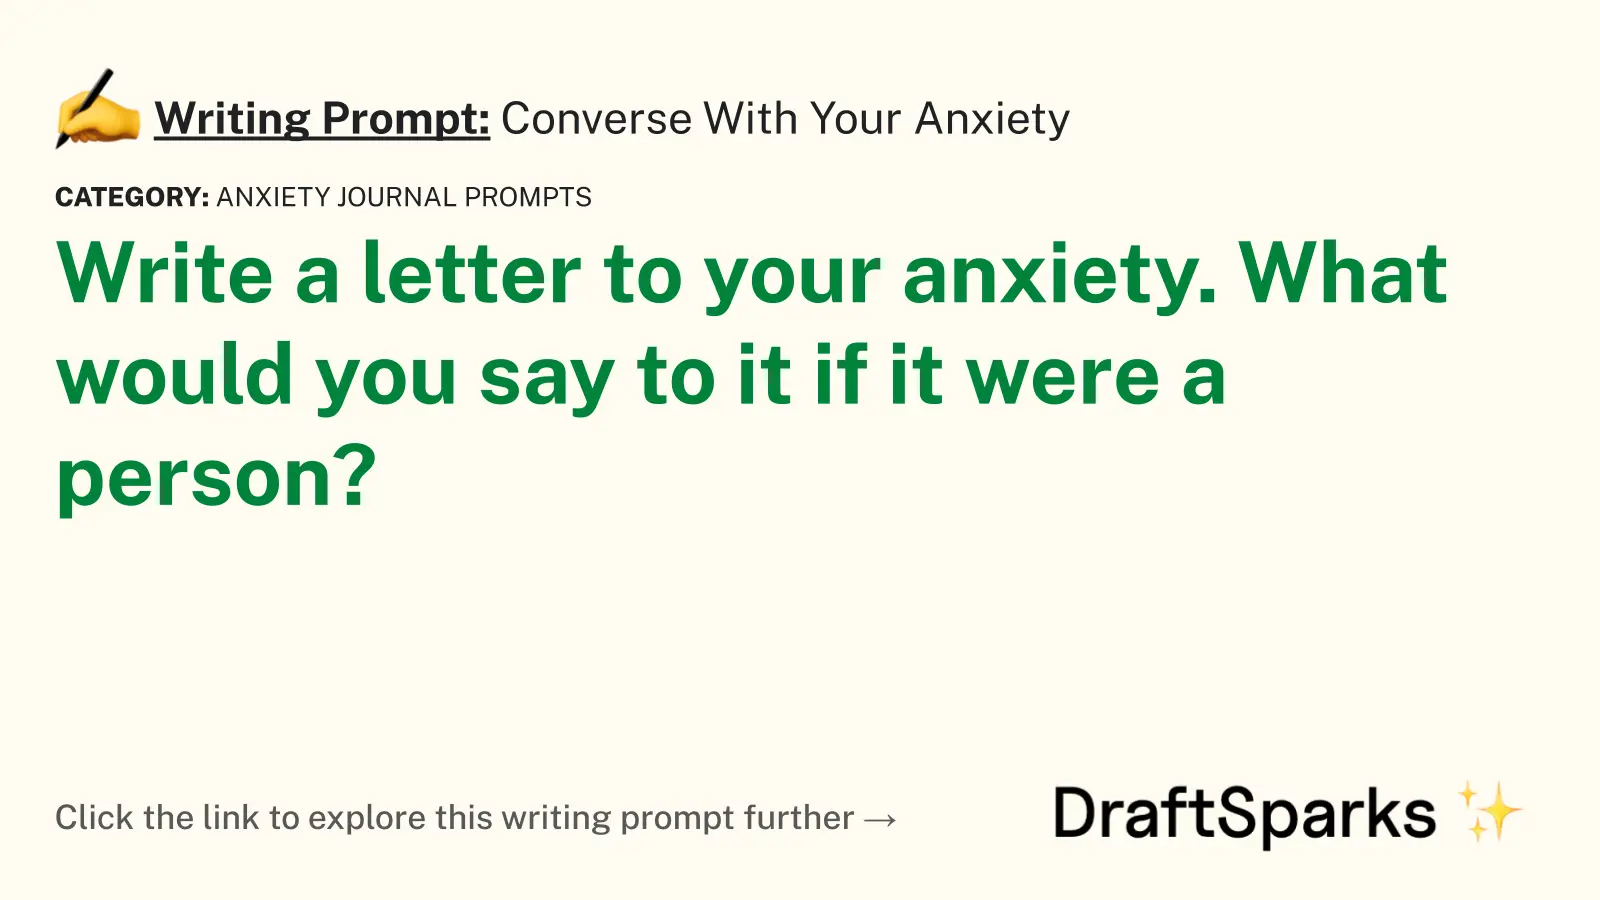 Converse With Your Anxiety